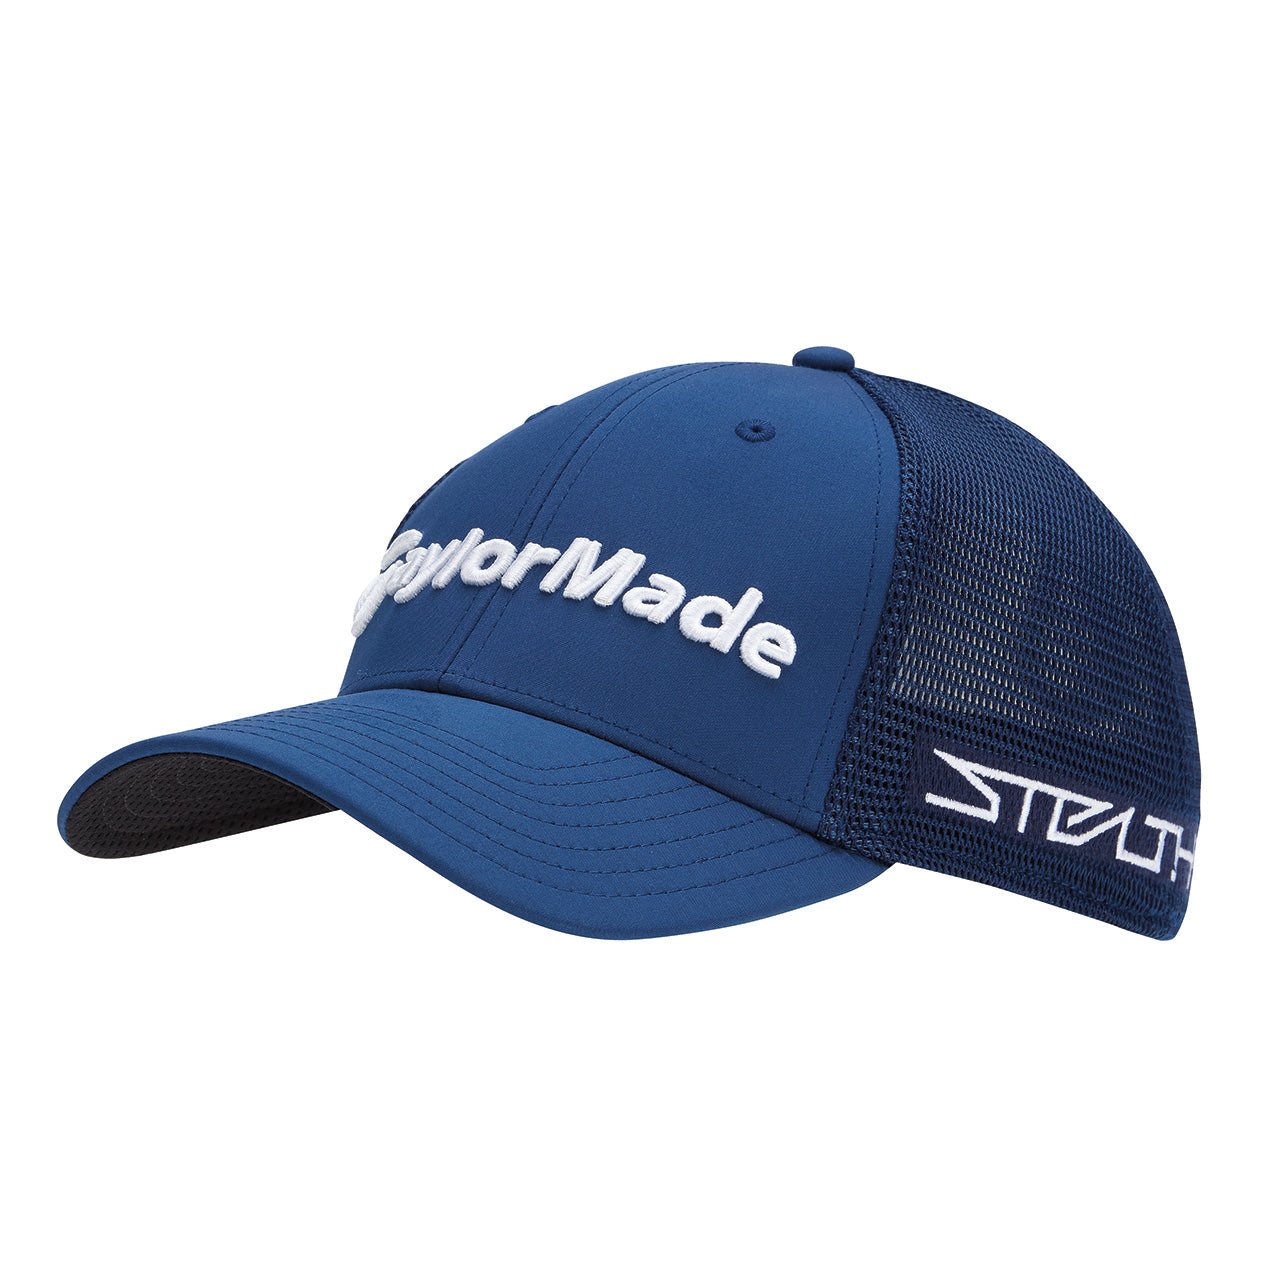 TaylorMade Men's Tour Cage Fitted Hat